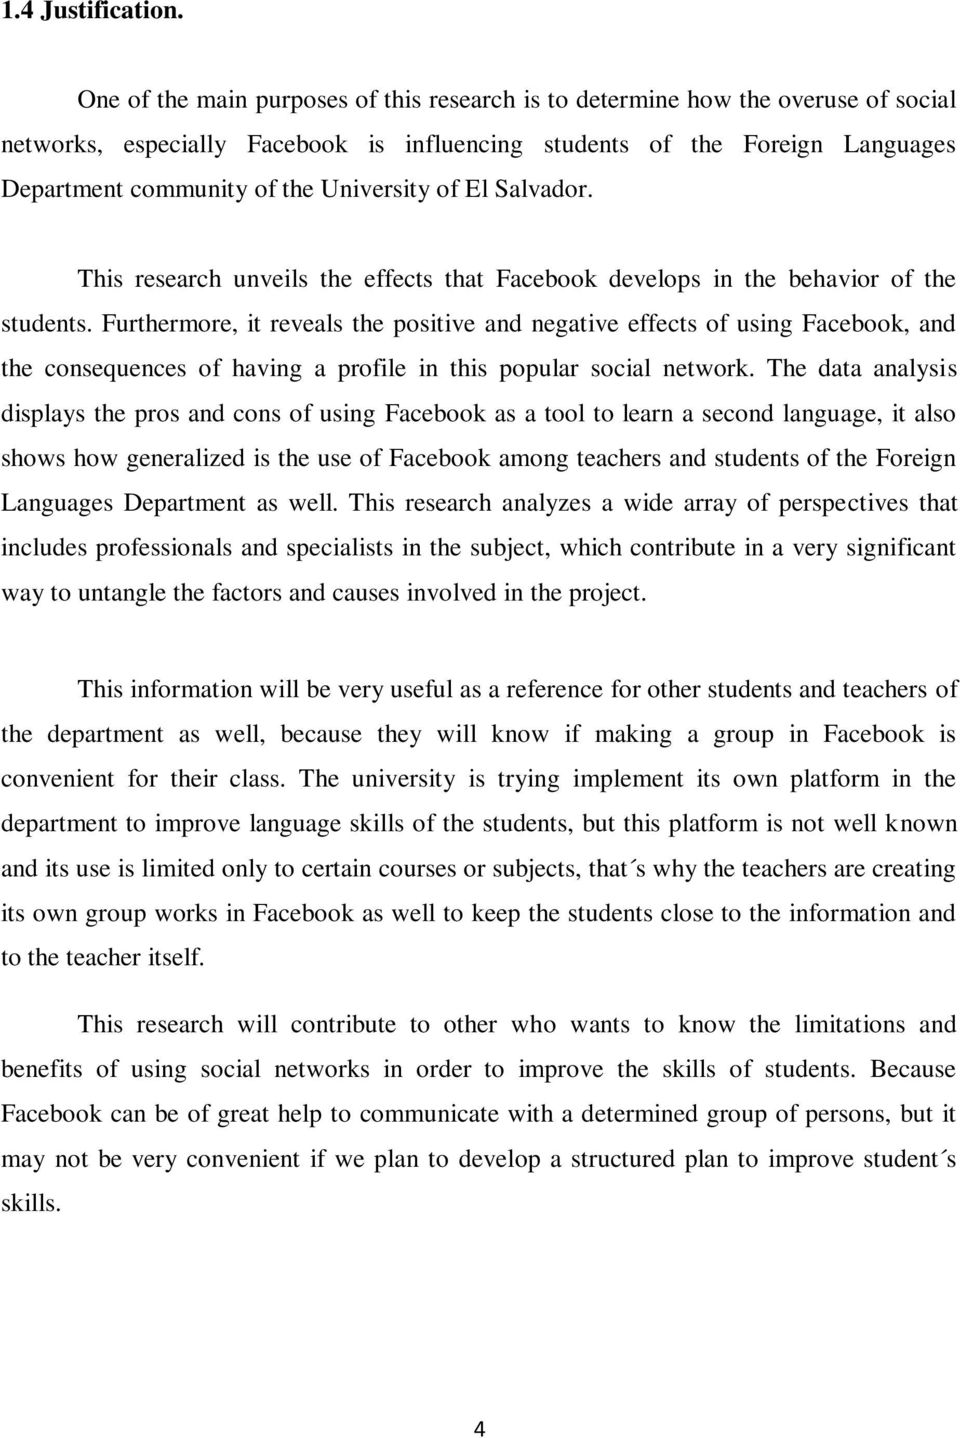 University of El Salvador. This research unveils the effects that Facebook develops in the behavior of the students.